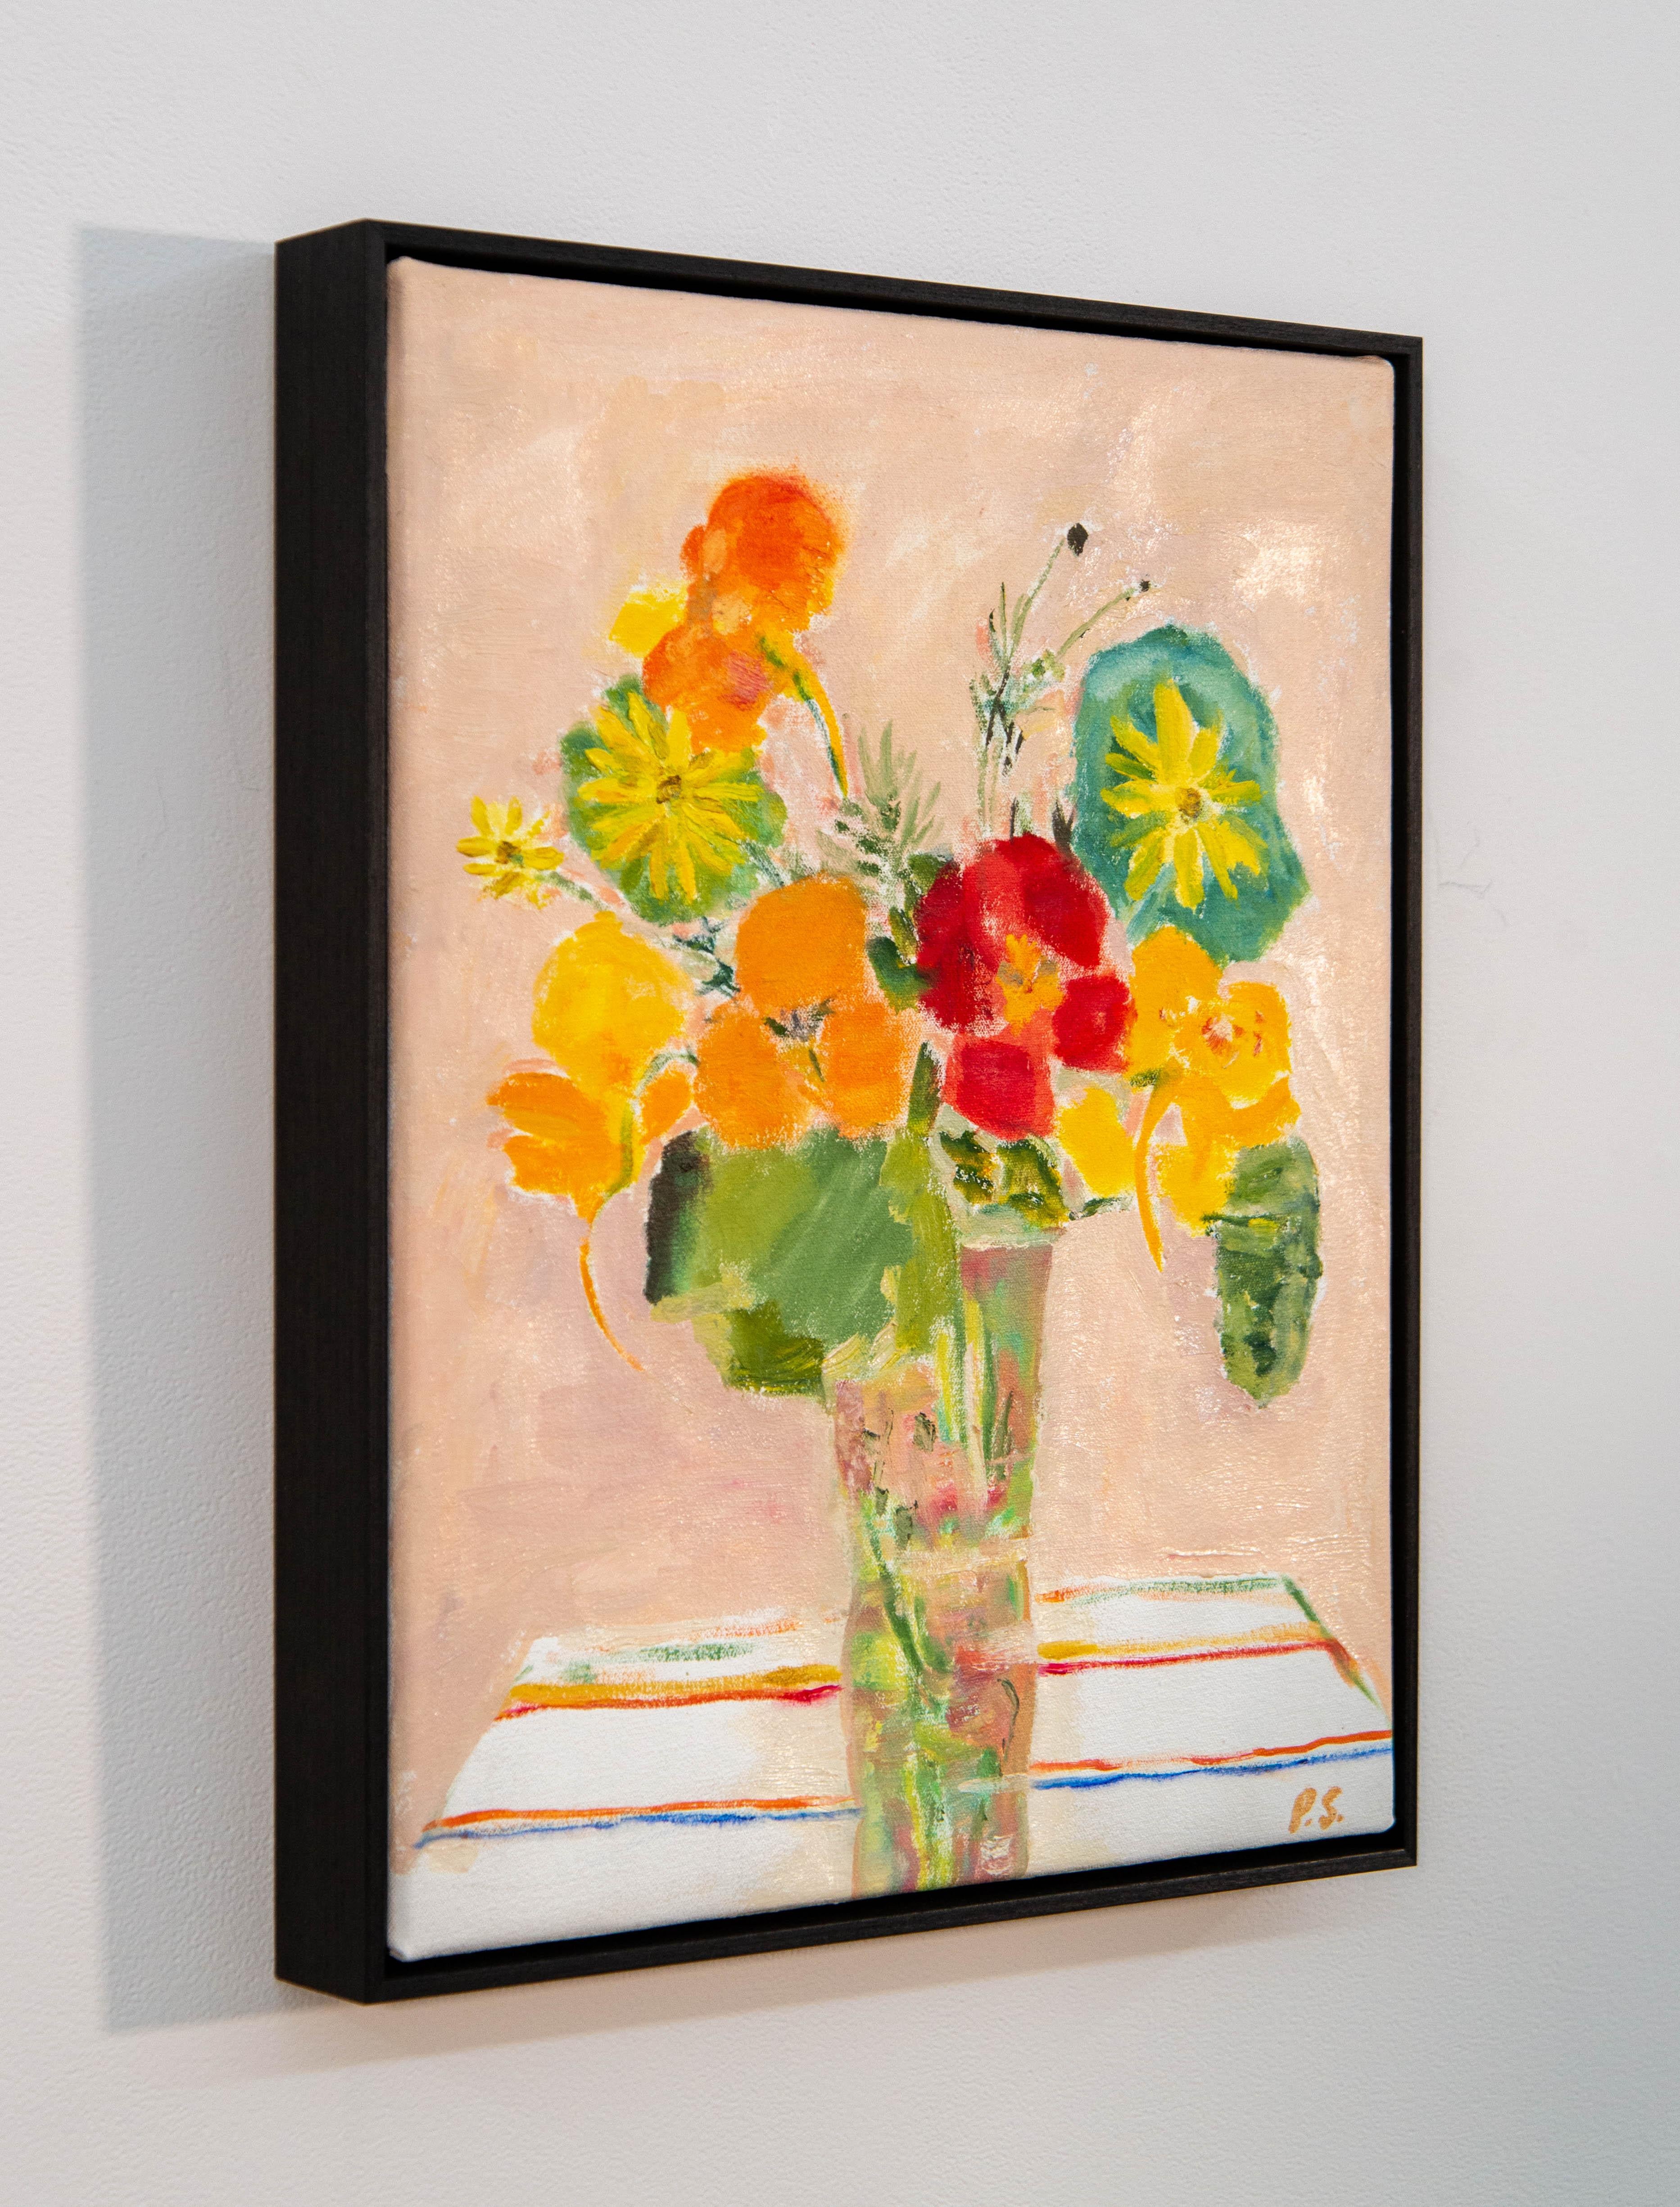 The simple beauty of a summer bouquet is celebrated in this lovely floral portrait by Pat Service. The Canadian artist chose to experiment with the classic still-life genre in her own unique way. Brightly coloured flowers in red, orange, yellow and